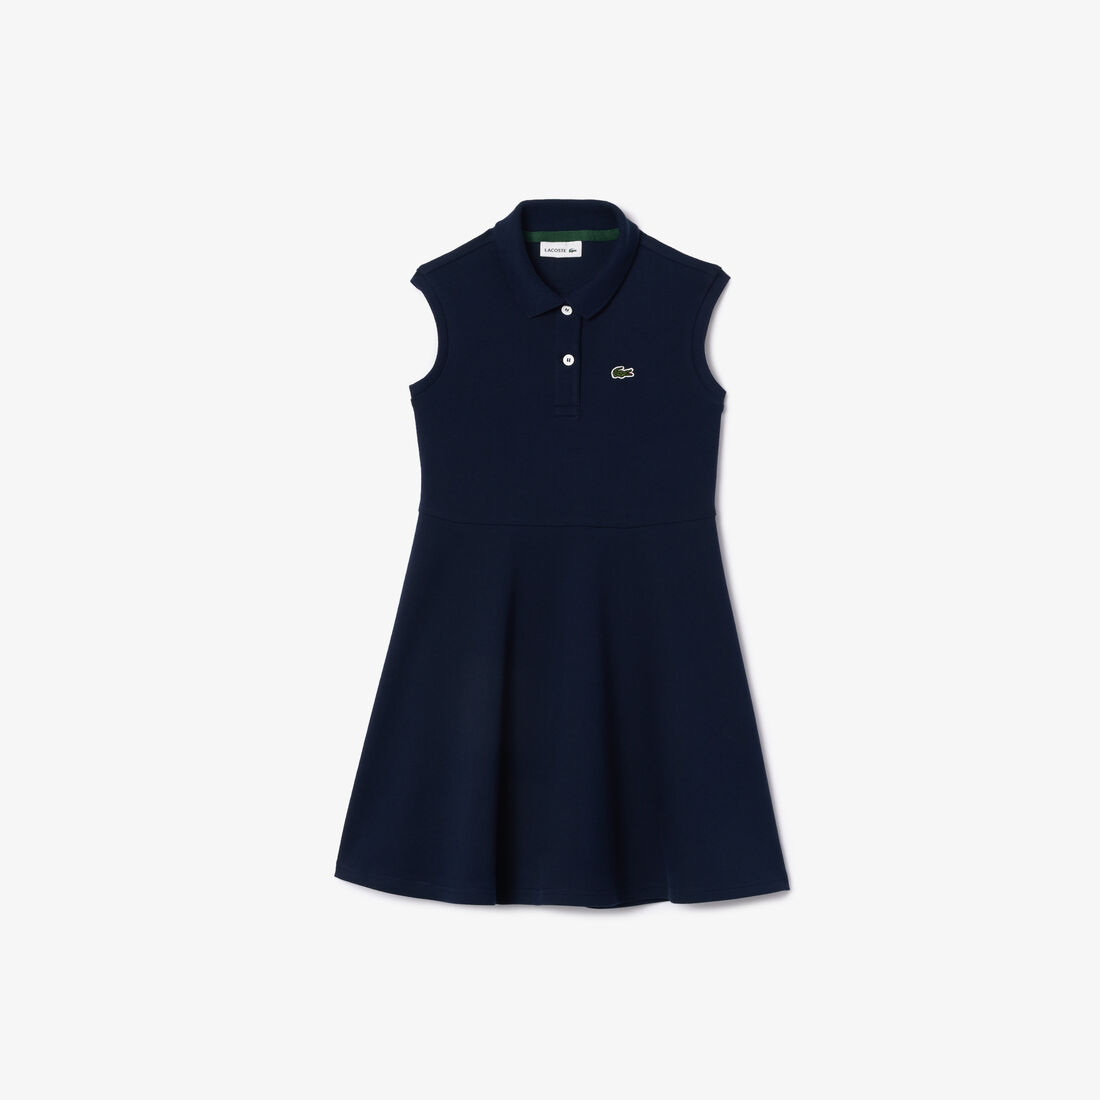 Girls' Lacoste Fit and Flare Stretch Pique Polo Dress - EJ5297-00-166